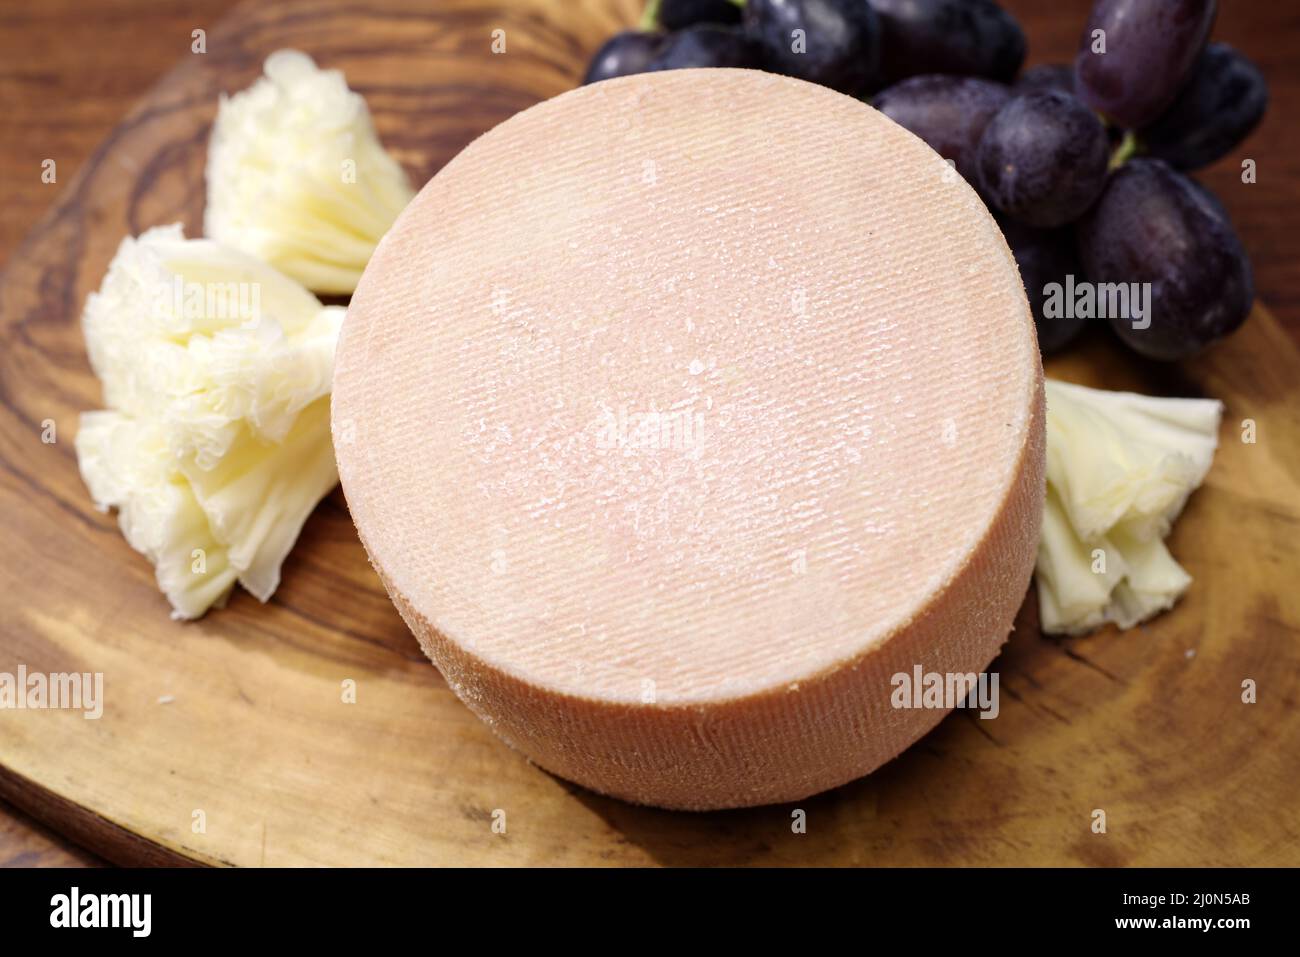 https://c8.alamy.com/comp/2J0N5AB/traditional-tete-de-moine-aged-mountain-cheese-of-the-alps-offered-with-grapes-on-a-wooden-board-2J0N5AB.jpg